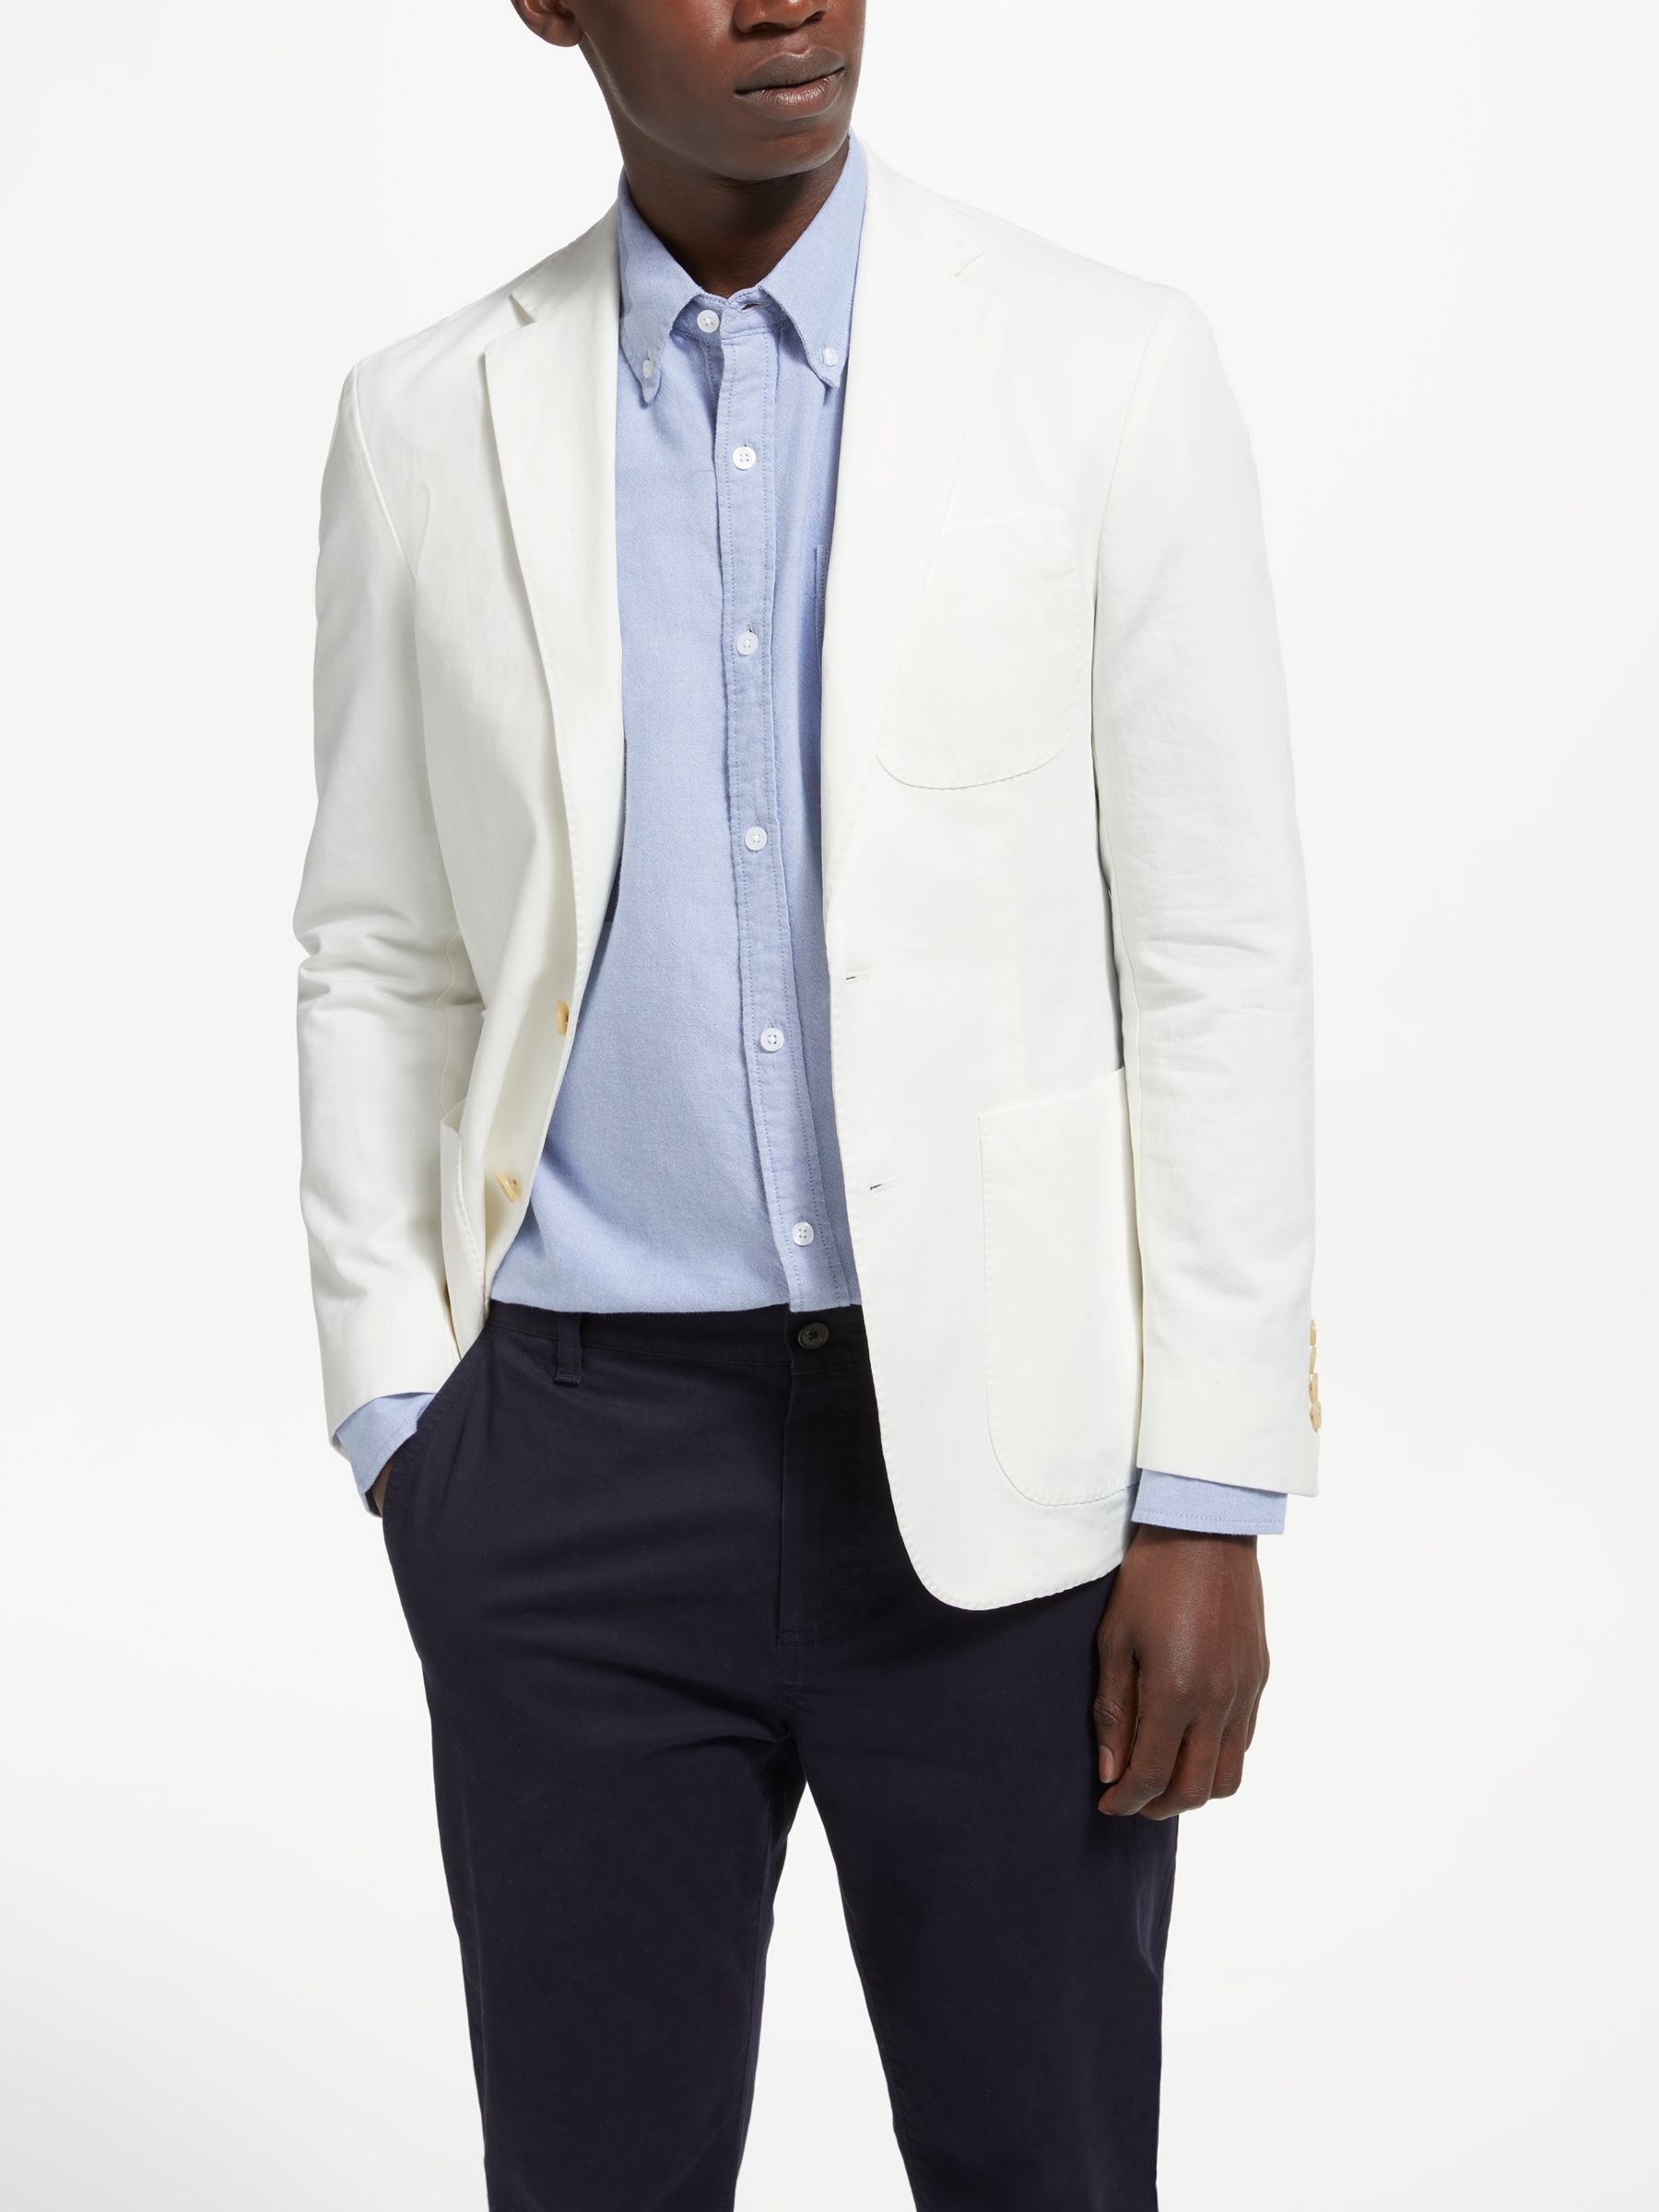 sports jacket with polo